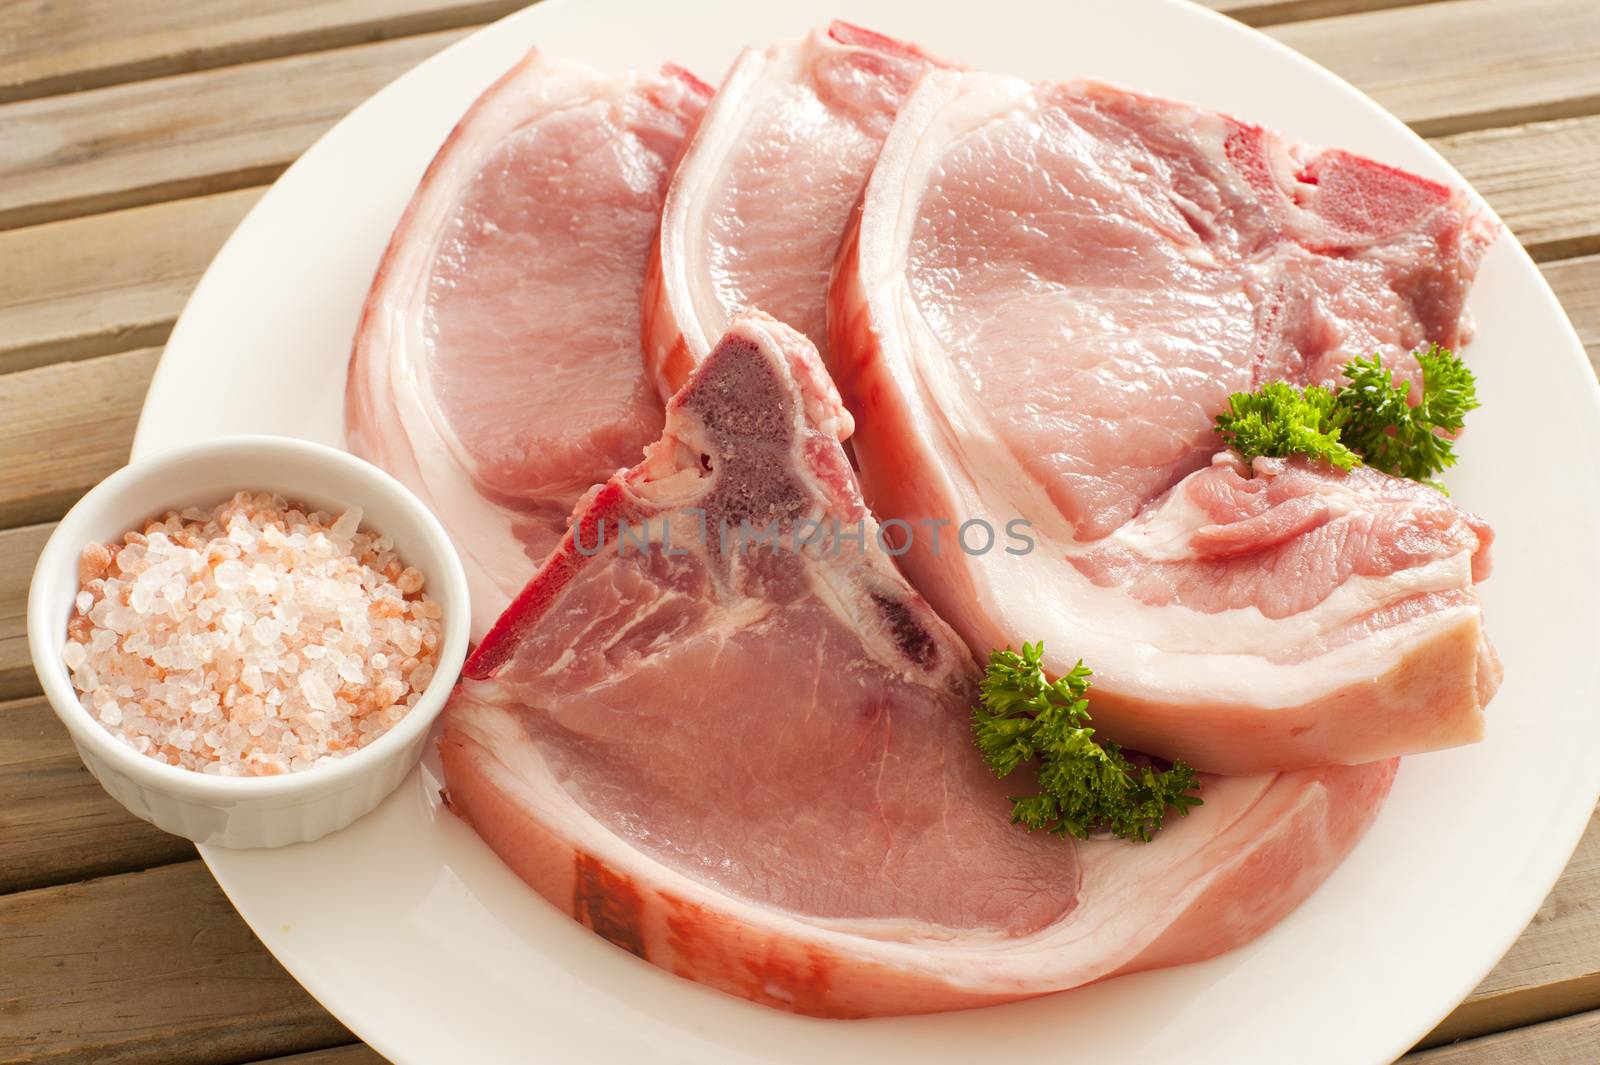 Close up Fresh Pork Chops with Herbs on a White Round Plate with Rock Salt on a Saucer.